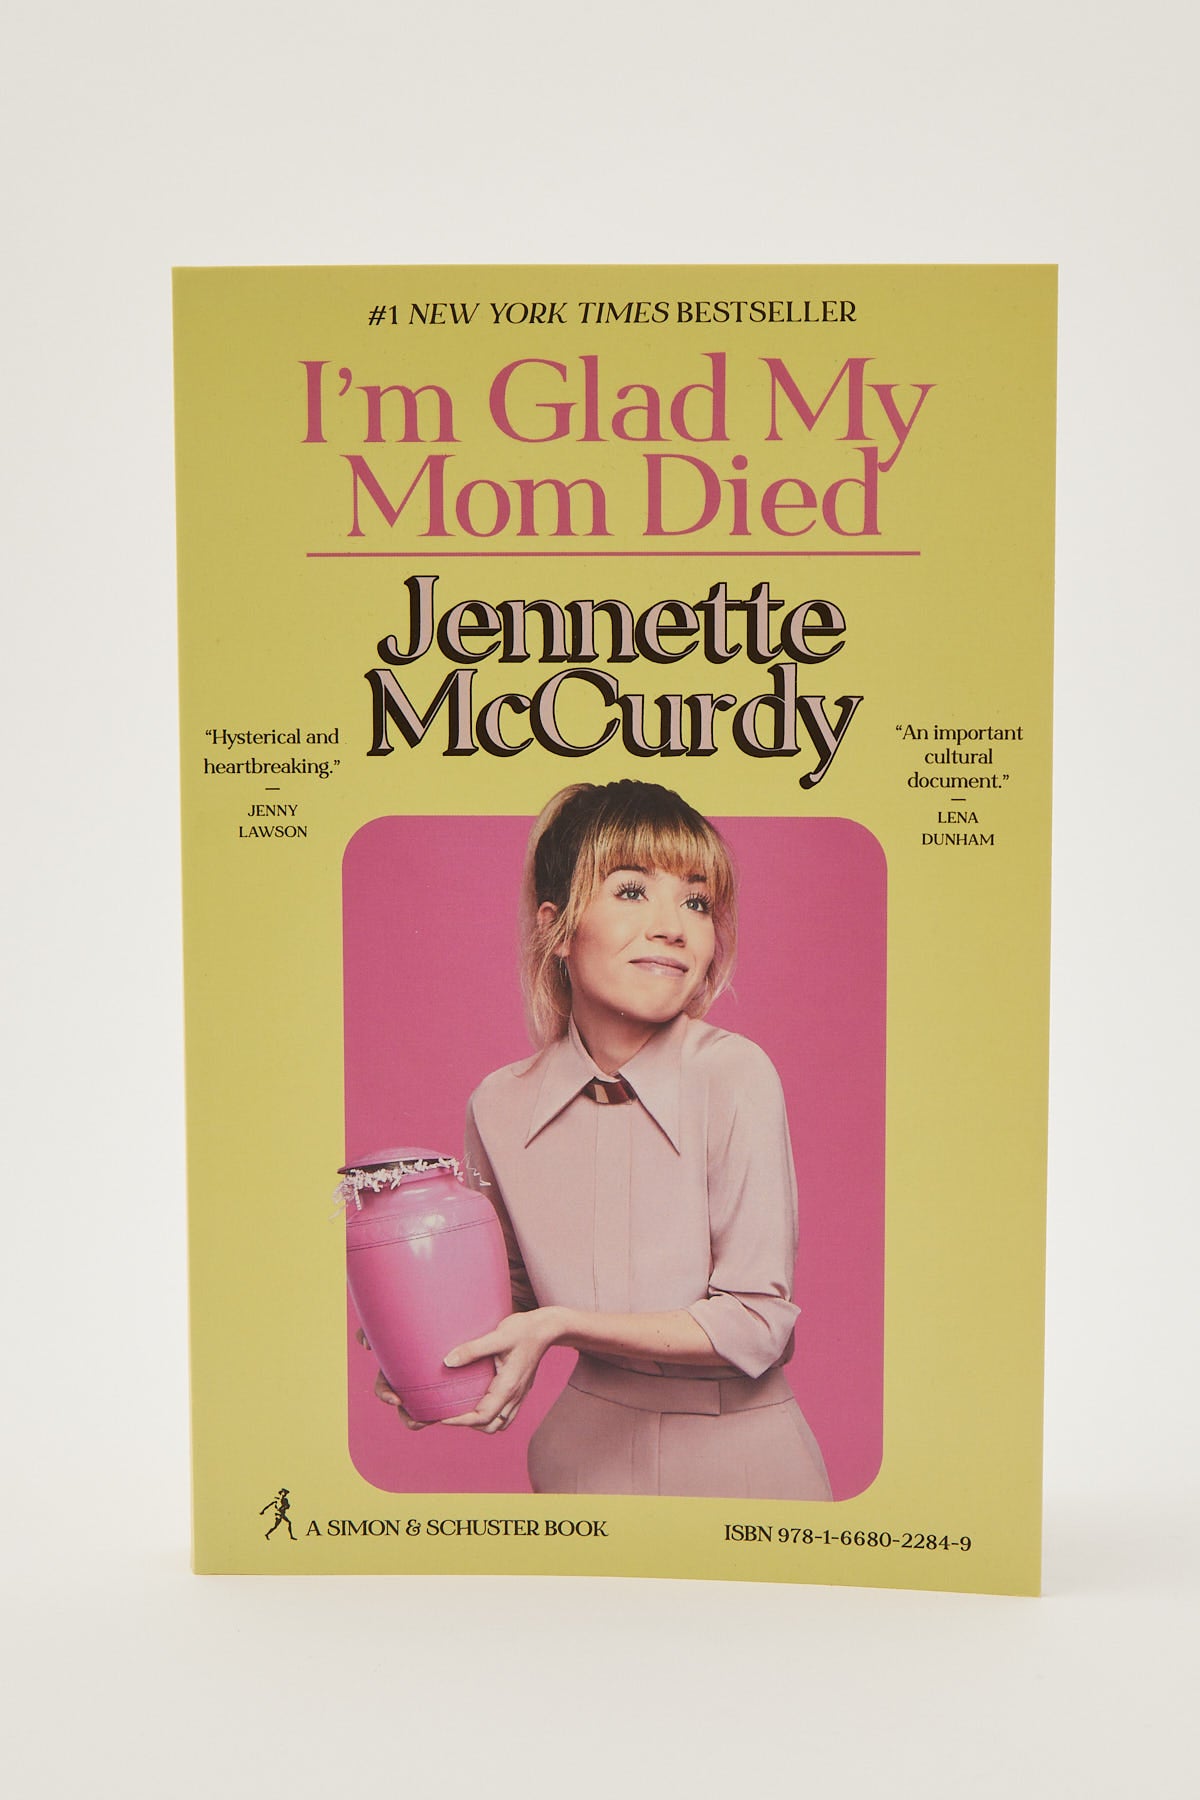 I'm Glad My Mom Died by Jennette McCurdy Multi